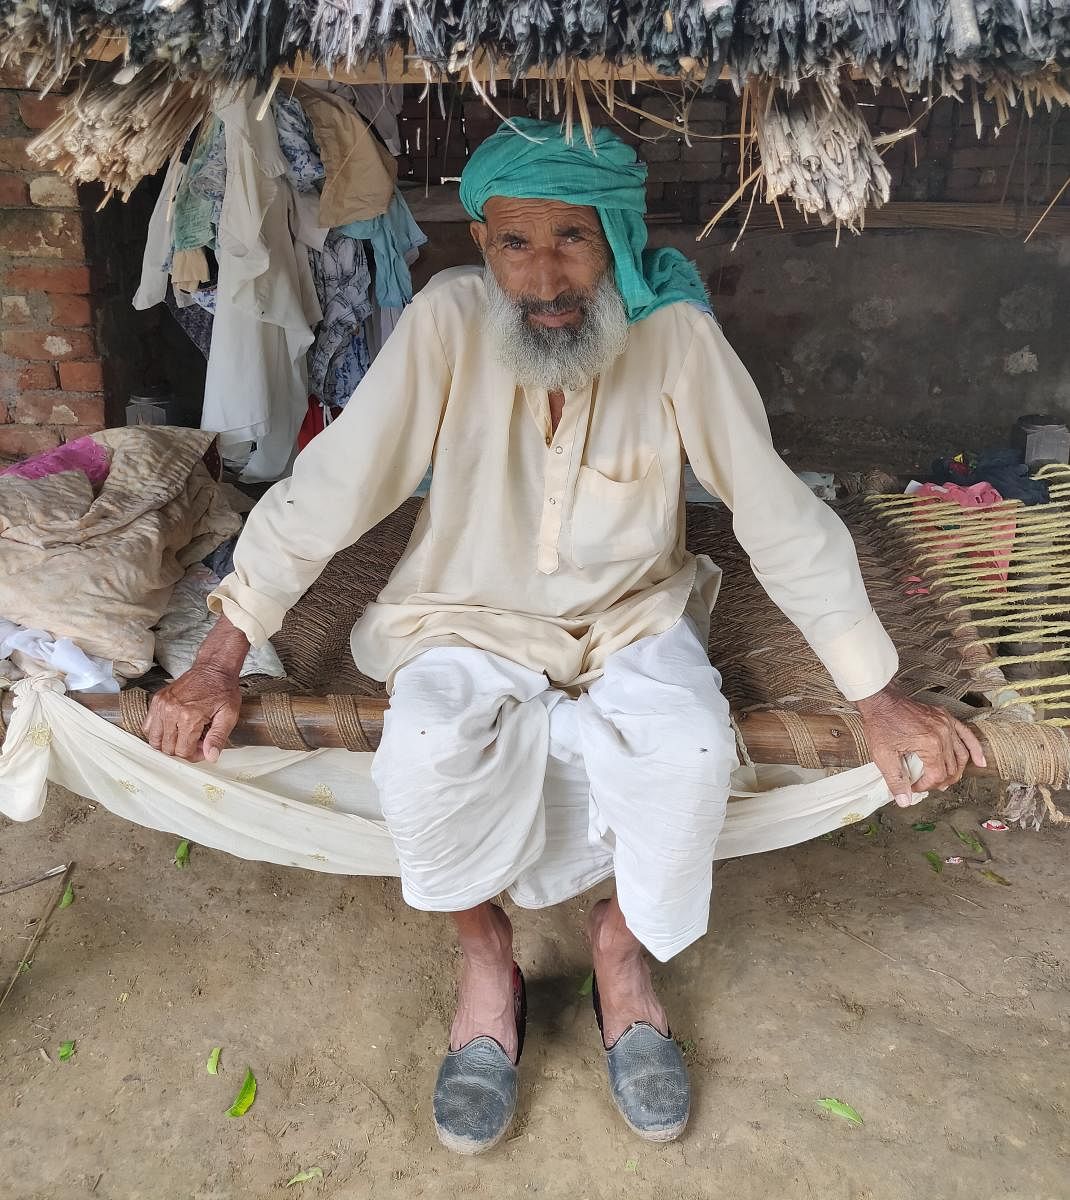 Sulaiman, the father of Akbar Khan, who was lynched in 2018.